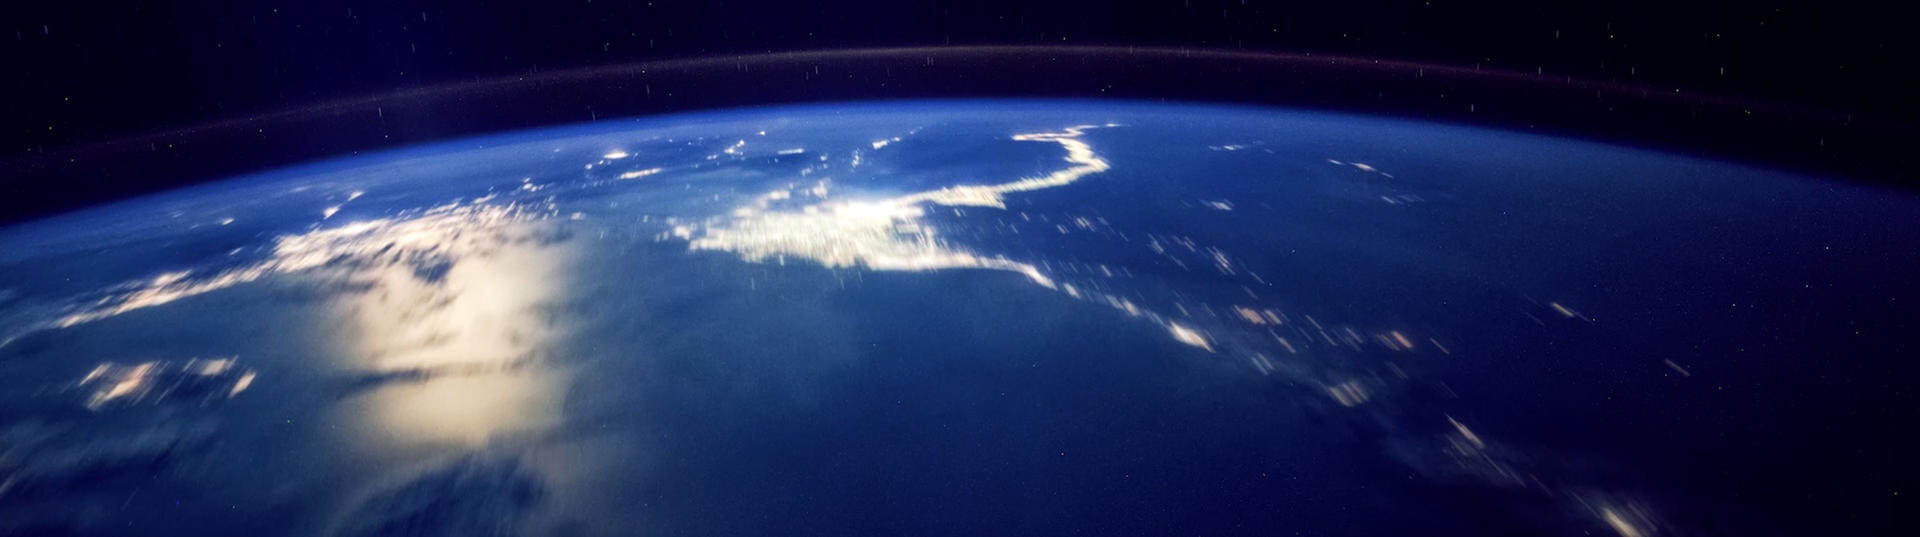 World at night seen from the ISS